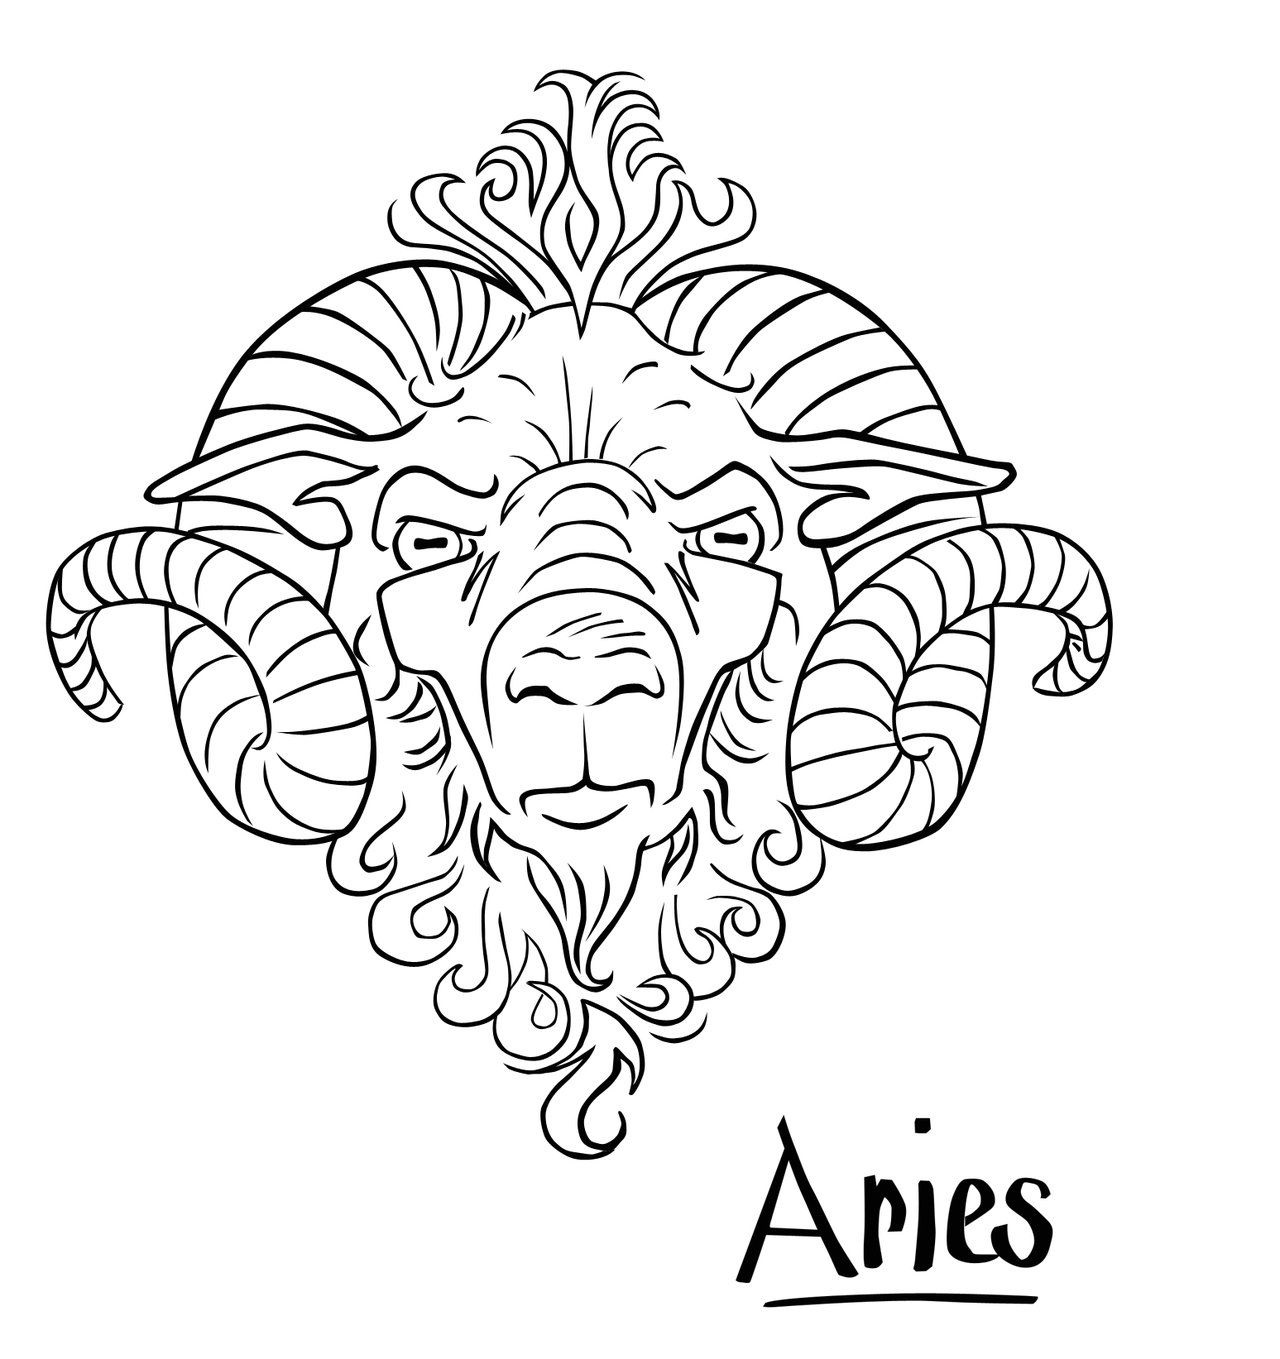 Aries Coloring Pages Pdf to Print - Free Aries Coloring Pages